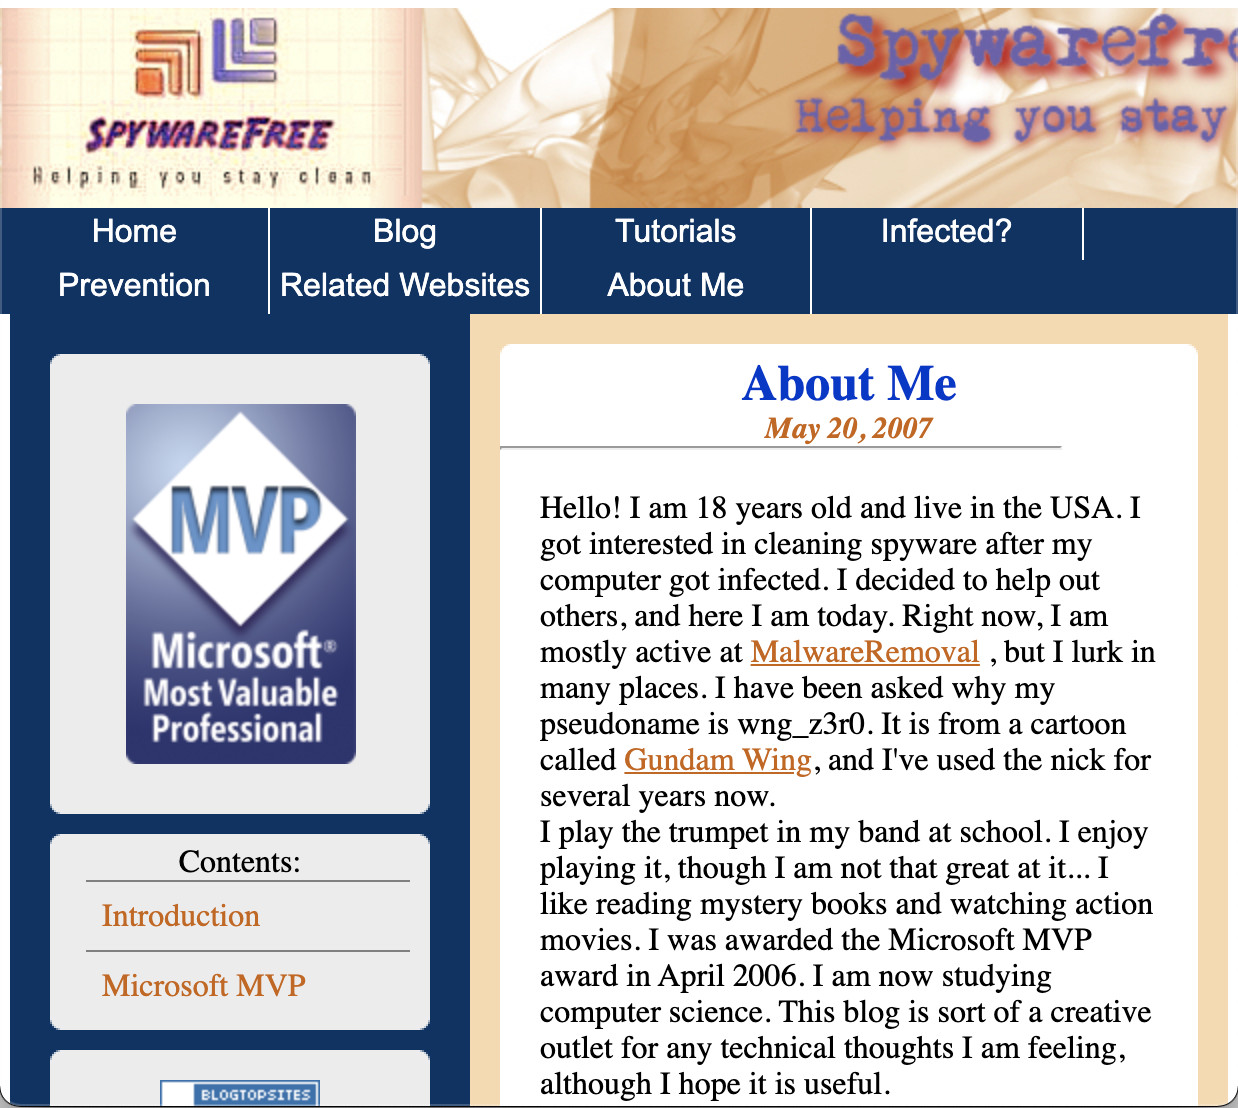 Screencap of spyware-free.us website, my original blog. Shows the about-me page.